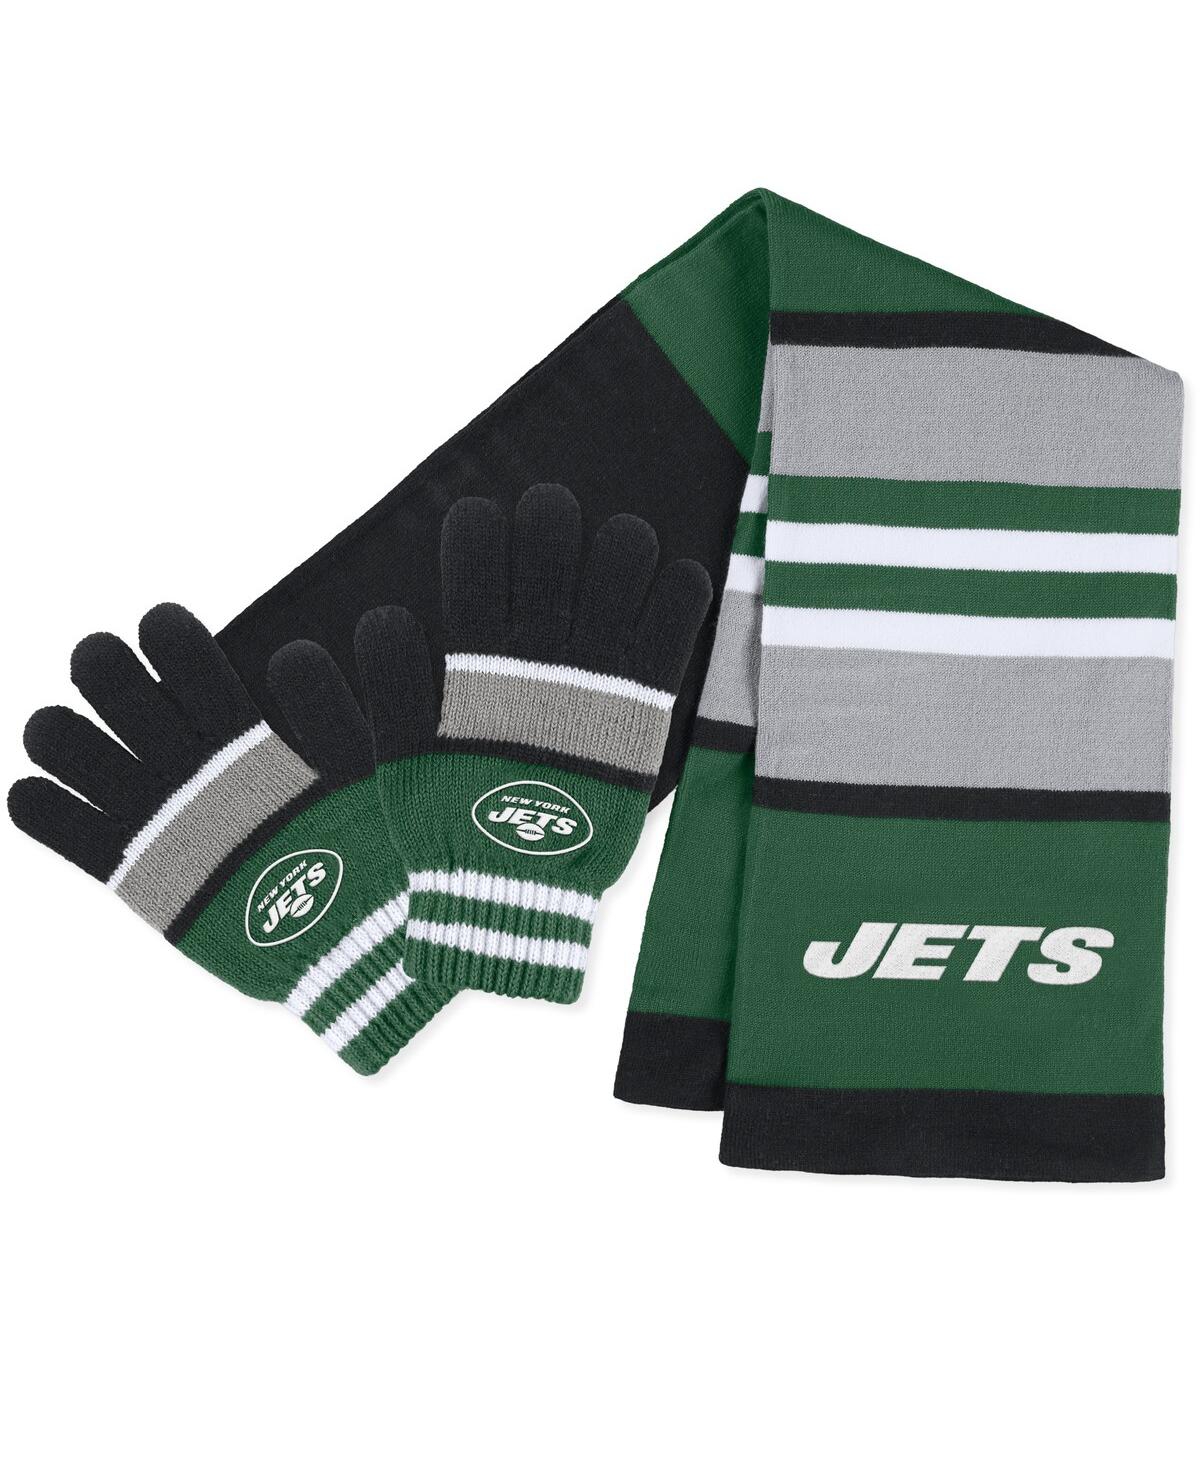 Women's Wear by Erin Andrews New York Jets Stripe Glove and Scarf Set - Green